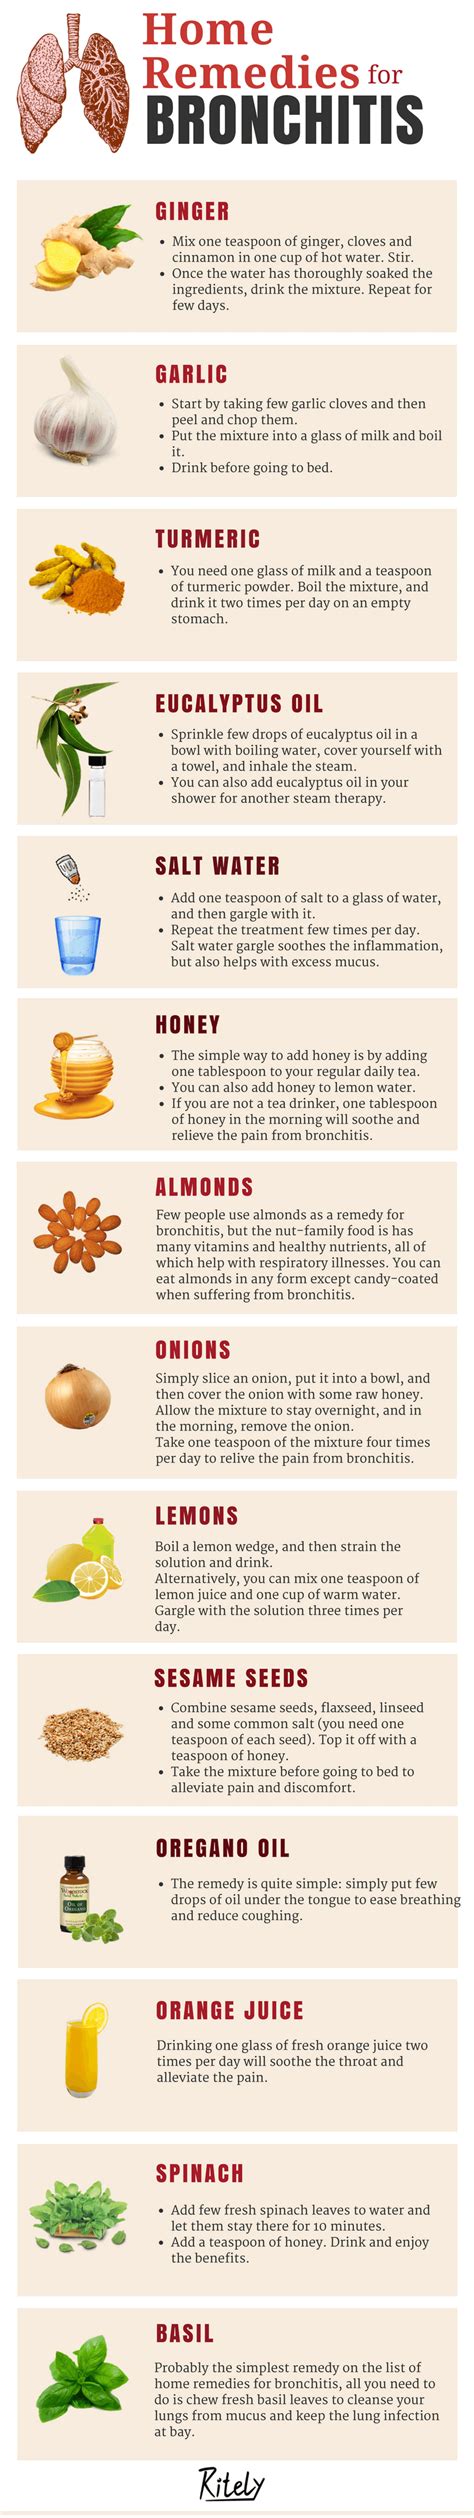 Natural Home Remedies For Treating Bronchitis Infographic